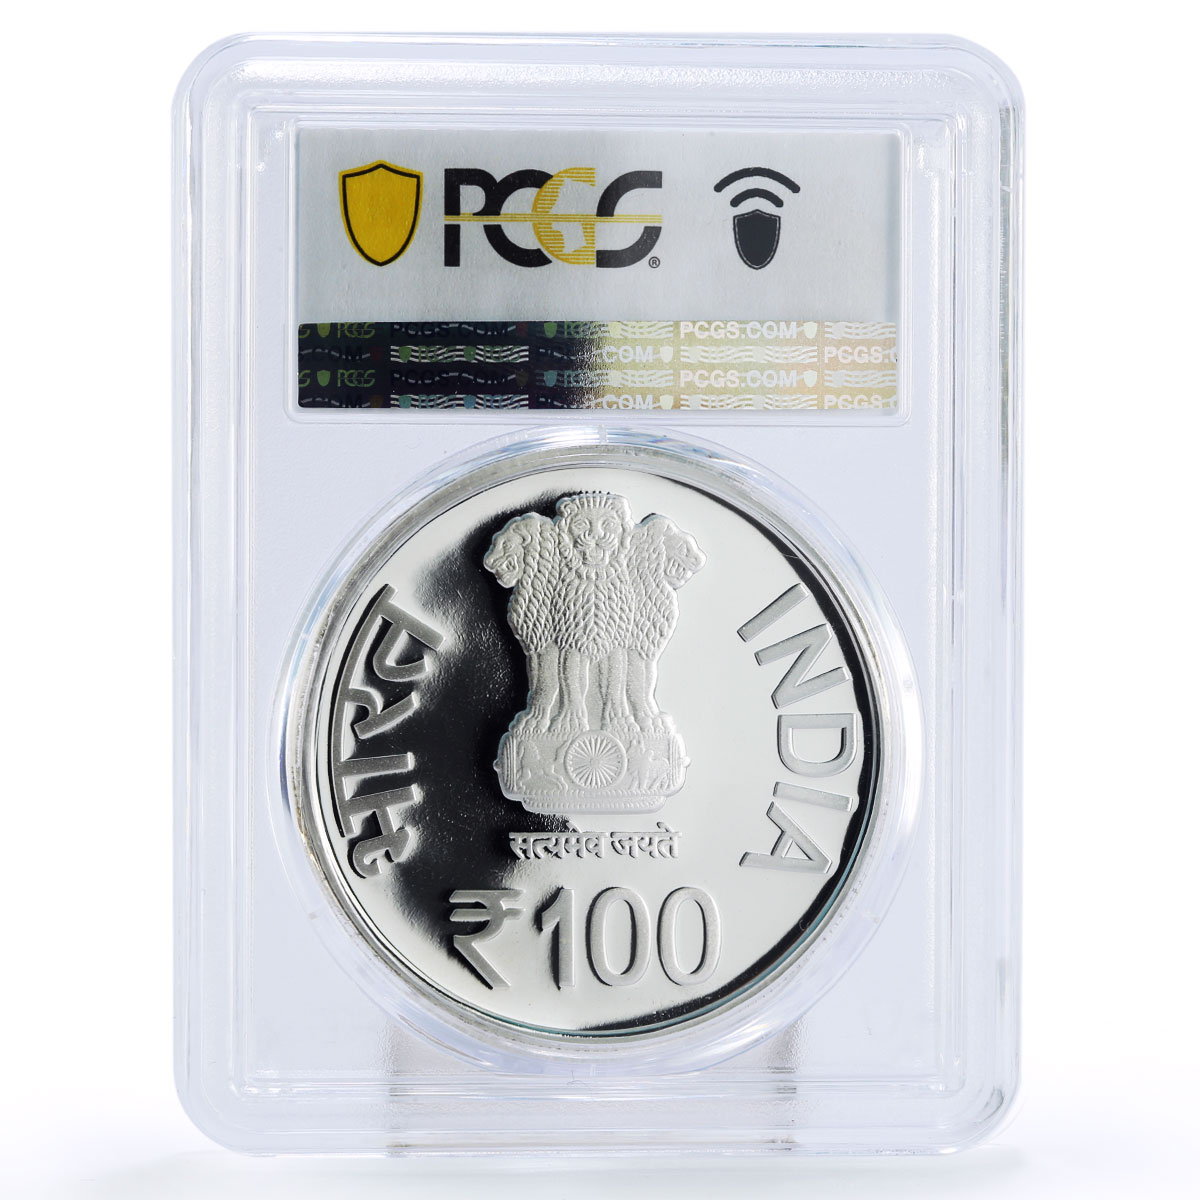 India 100 rupees 90th Interpol General Assembly PR65 PCGS silver coin 2022